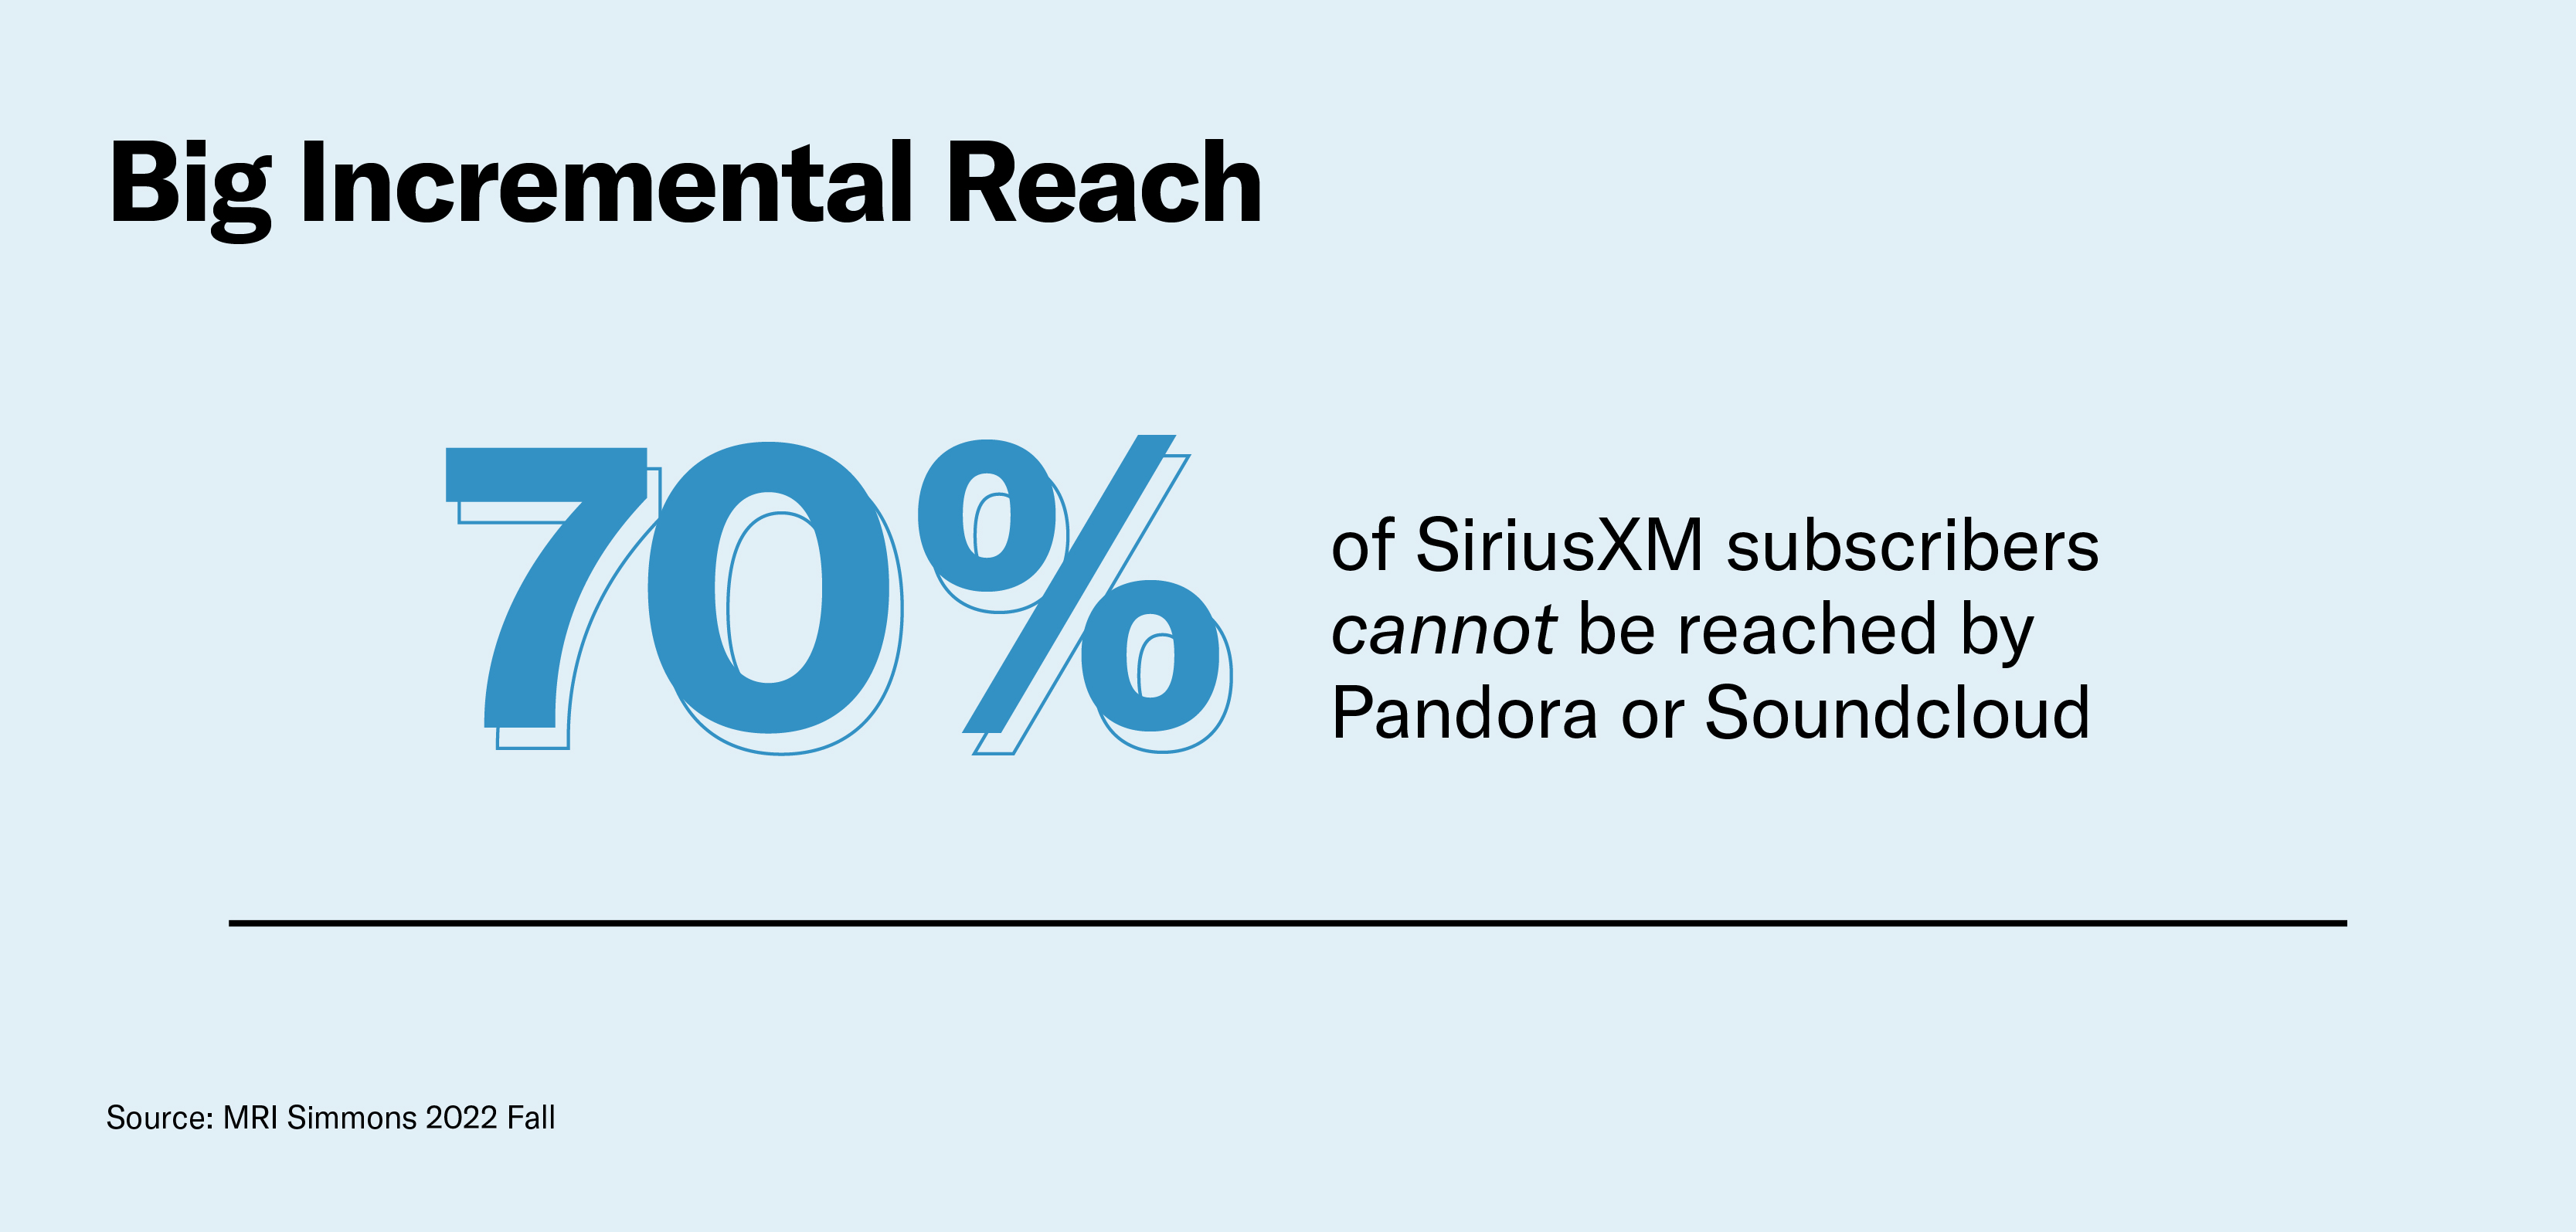 SiriusXM offers incremental reach over other digital audio formats